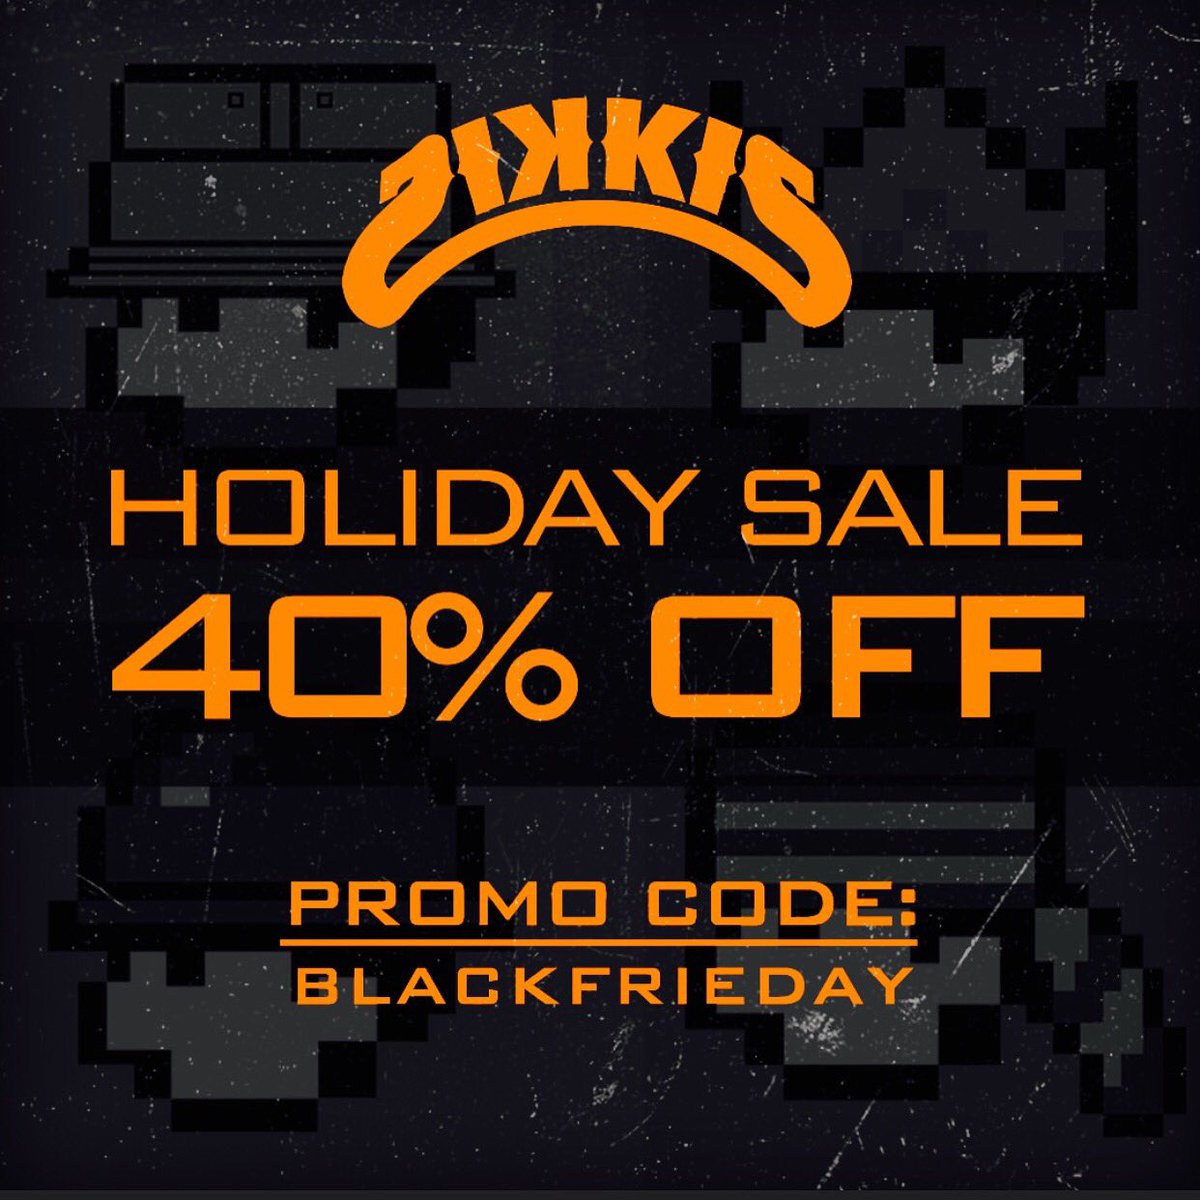 #CyberMonday sale 40% OFF the entire website SikkisUSA.com @SIKKISCLOTHING